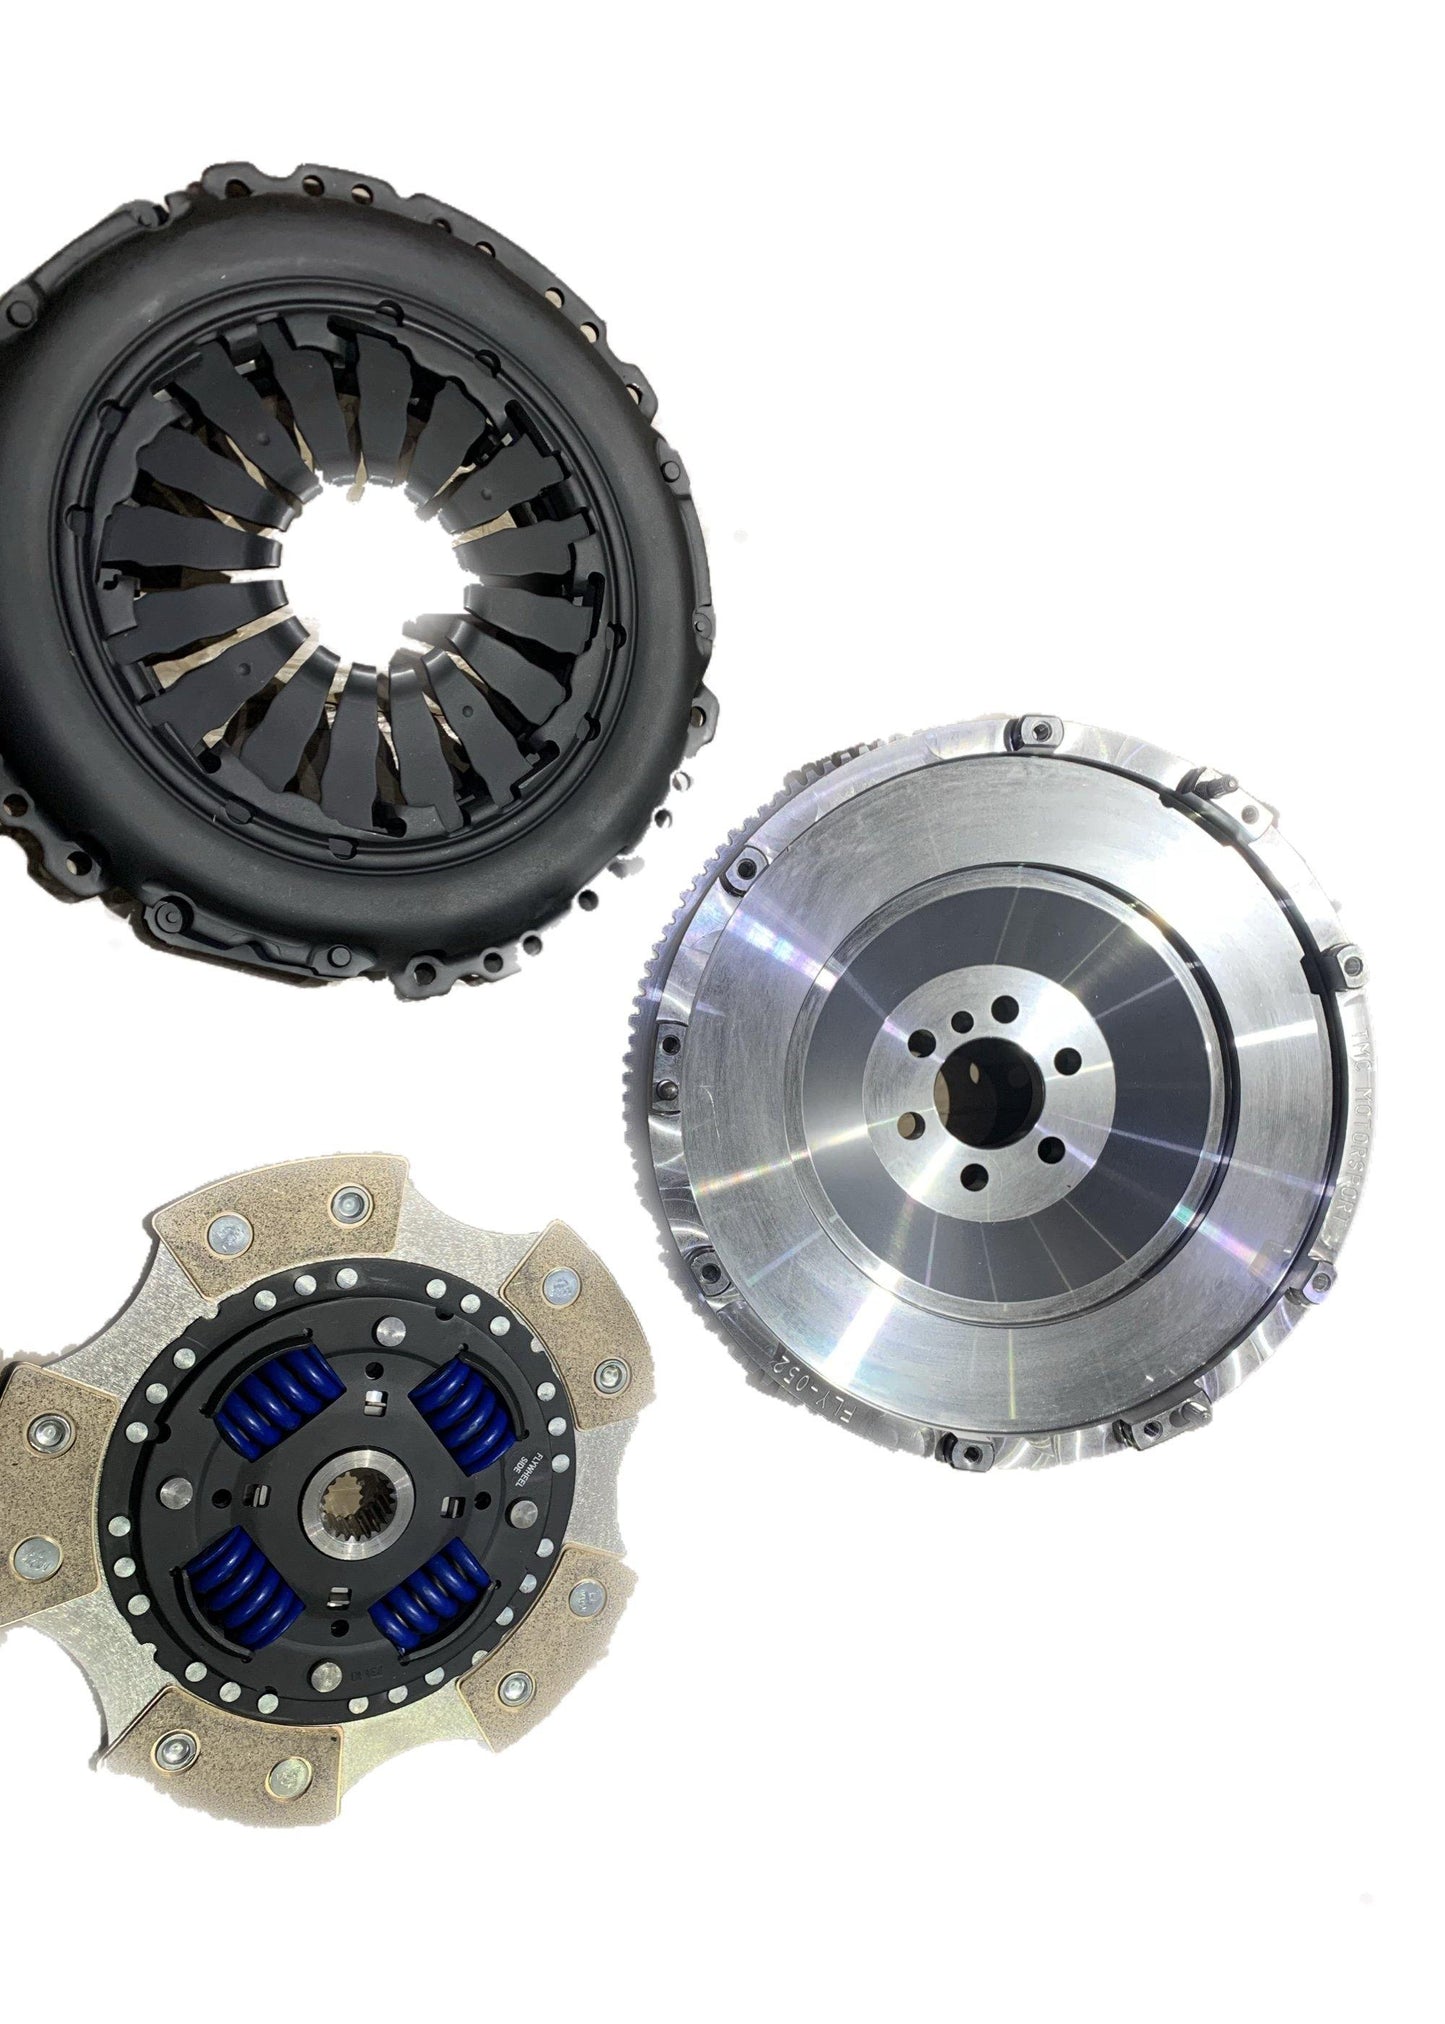 TMC Motorsport by CG Motorsport 777 CERAMIC LUCKY DEVIL RACE CLUTCH AND FLYWHEEL FOR ABARTH 500/595/695 - Abarth Tuning